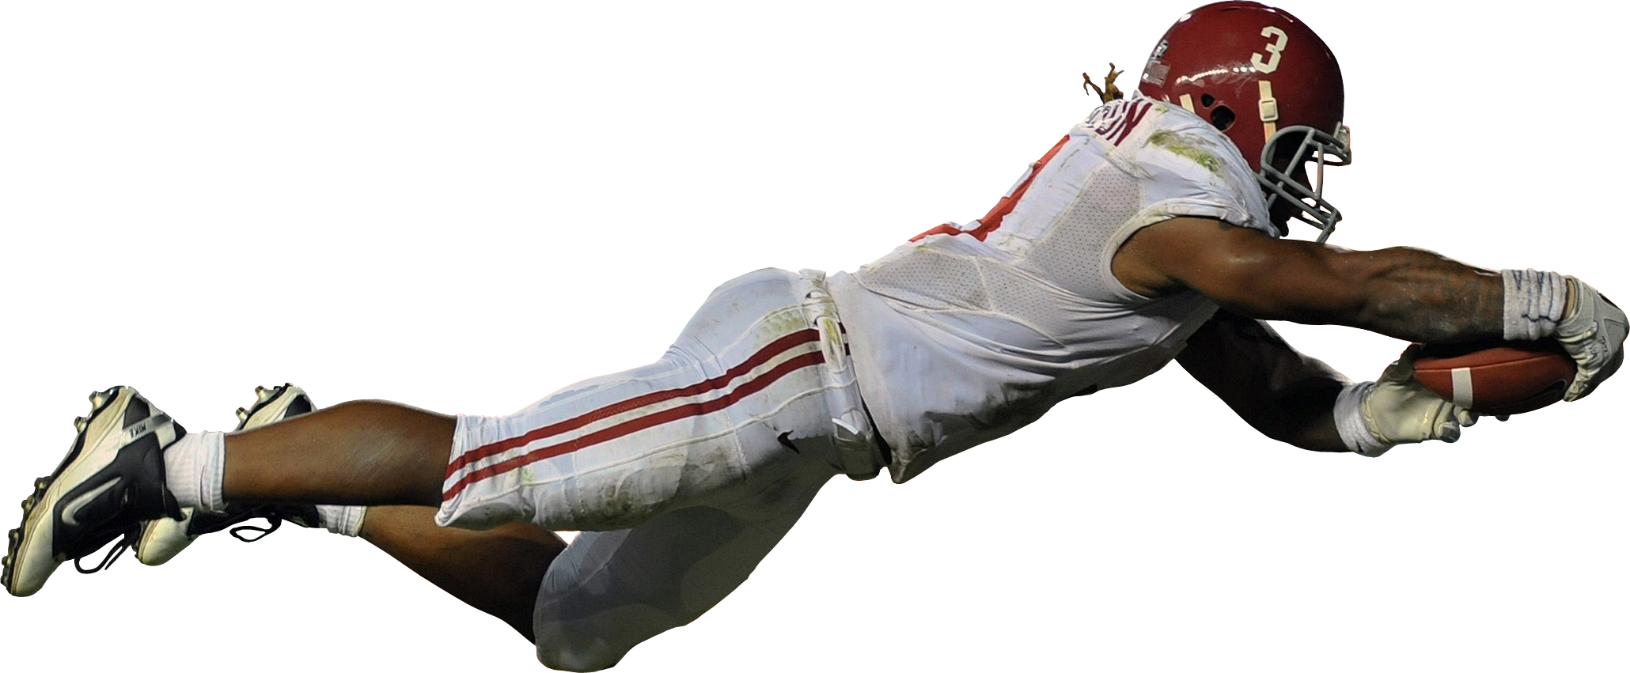 A Football Player Diving Into The Air